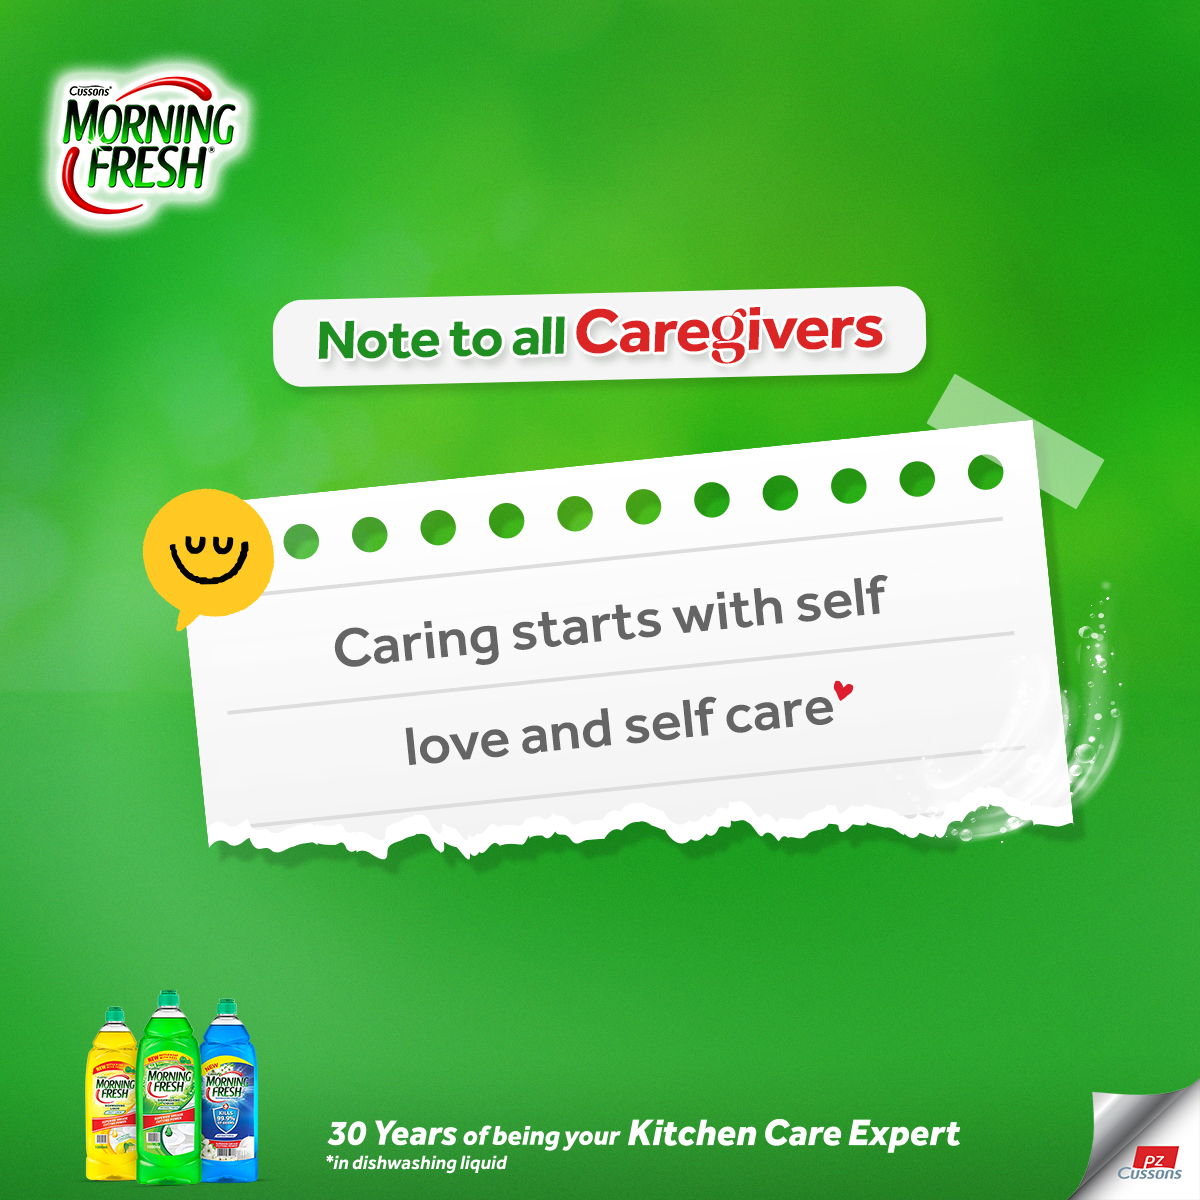 Self-love is not just a fad, but a centrepiece that keeps you whole for you and yours. Remember to love up on yourself in this season of love.
#KitchenCareExpert #CaringFortheCaregiver #MorningFresh